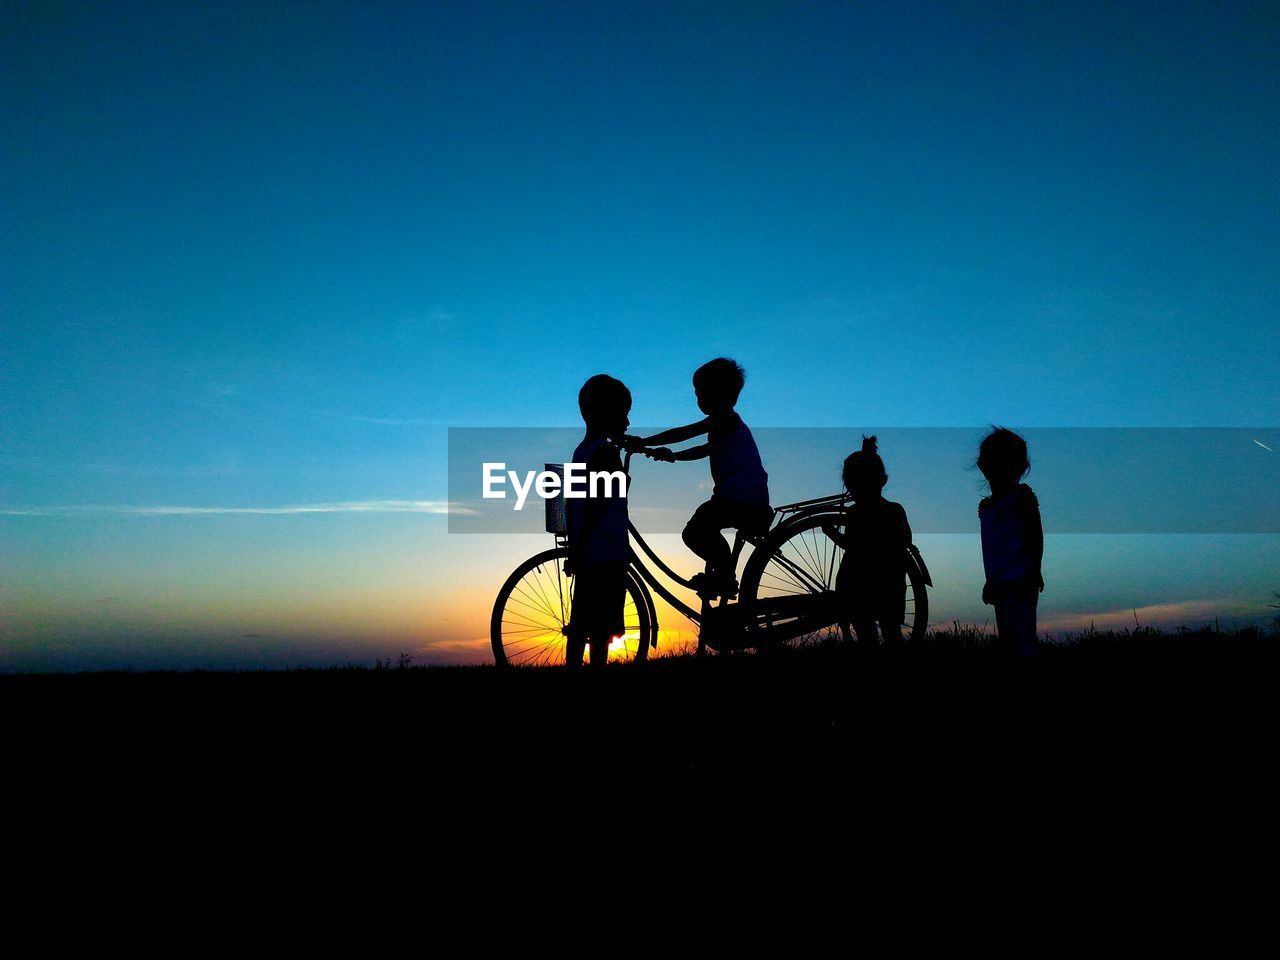 SILHOUETTE PEOPLE ON BICYCLE AGAINST CLEAR SKY